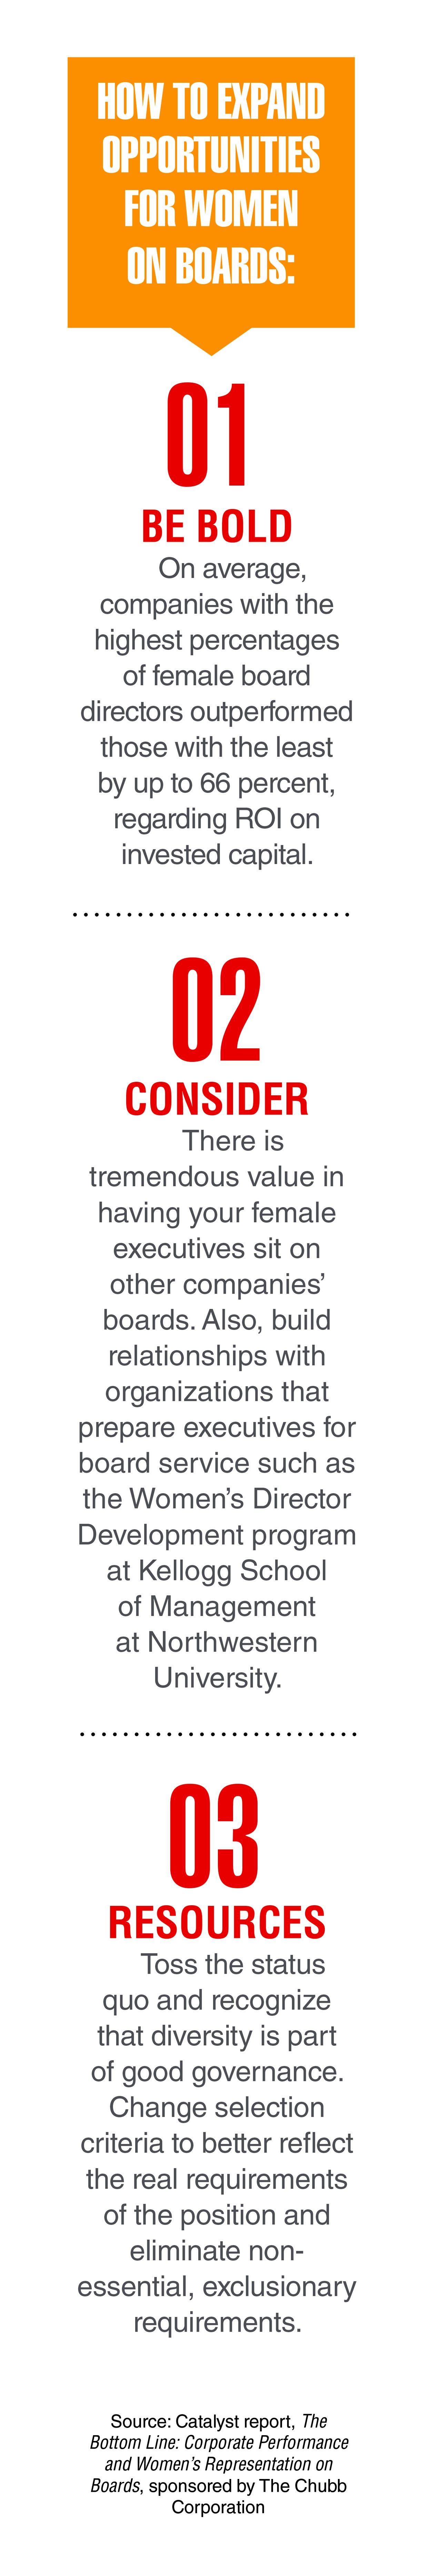 Bringing Women to the Table | Insigniam Quarterly